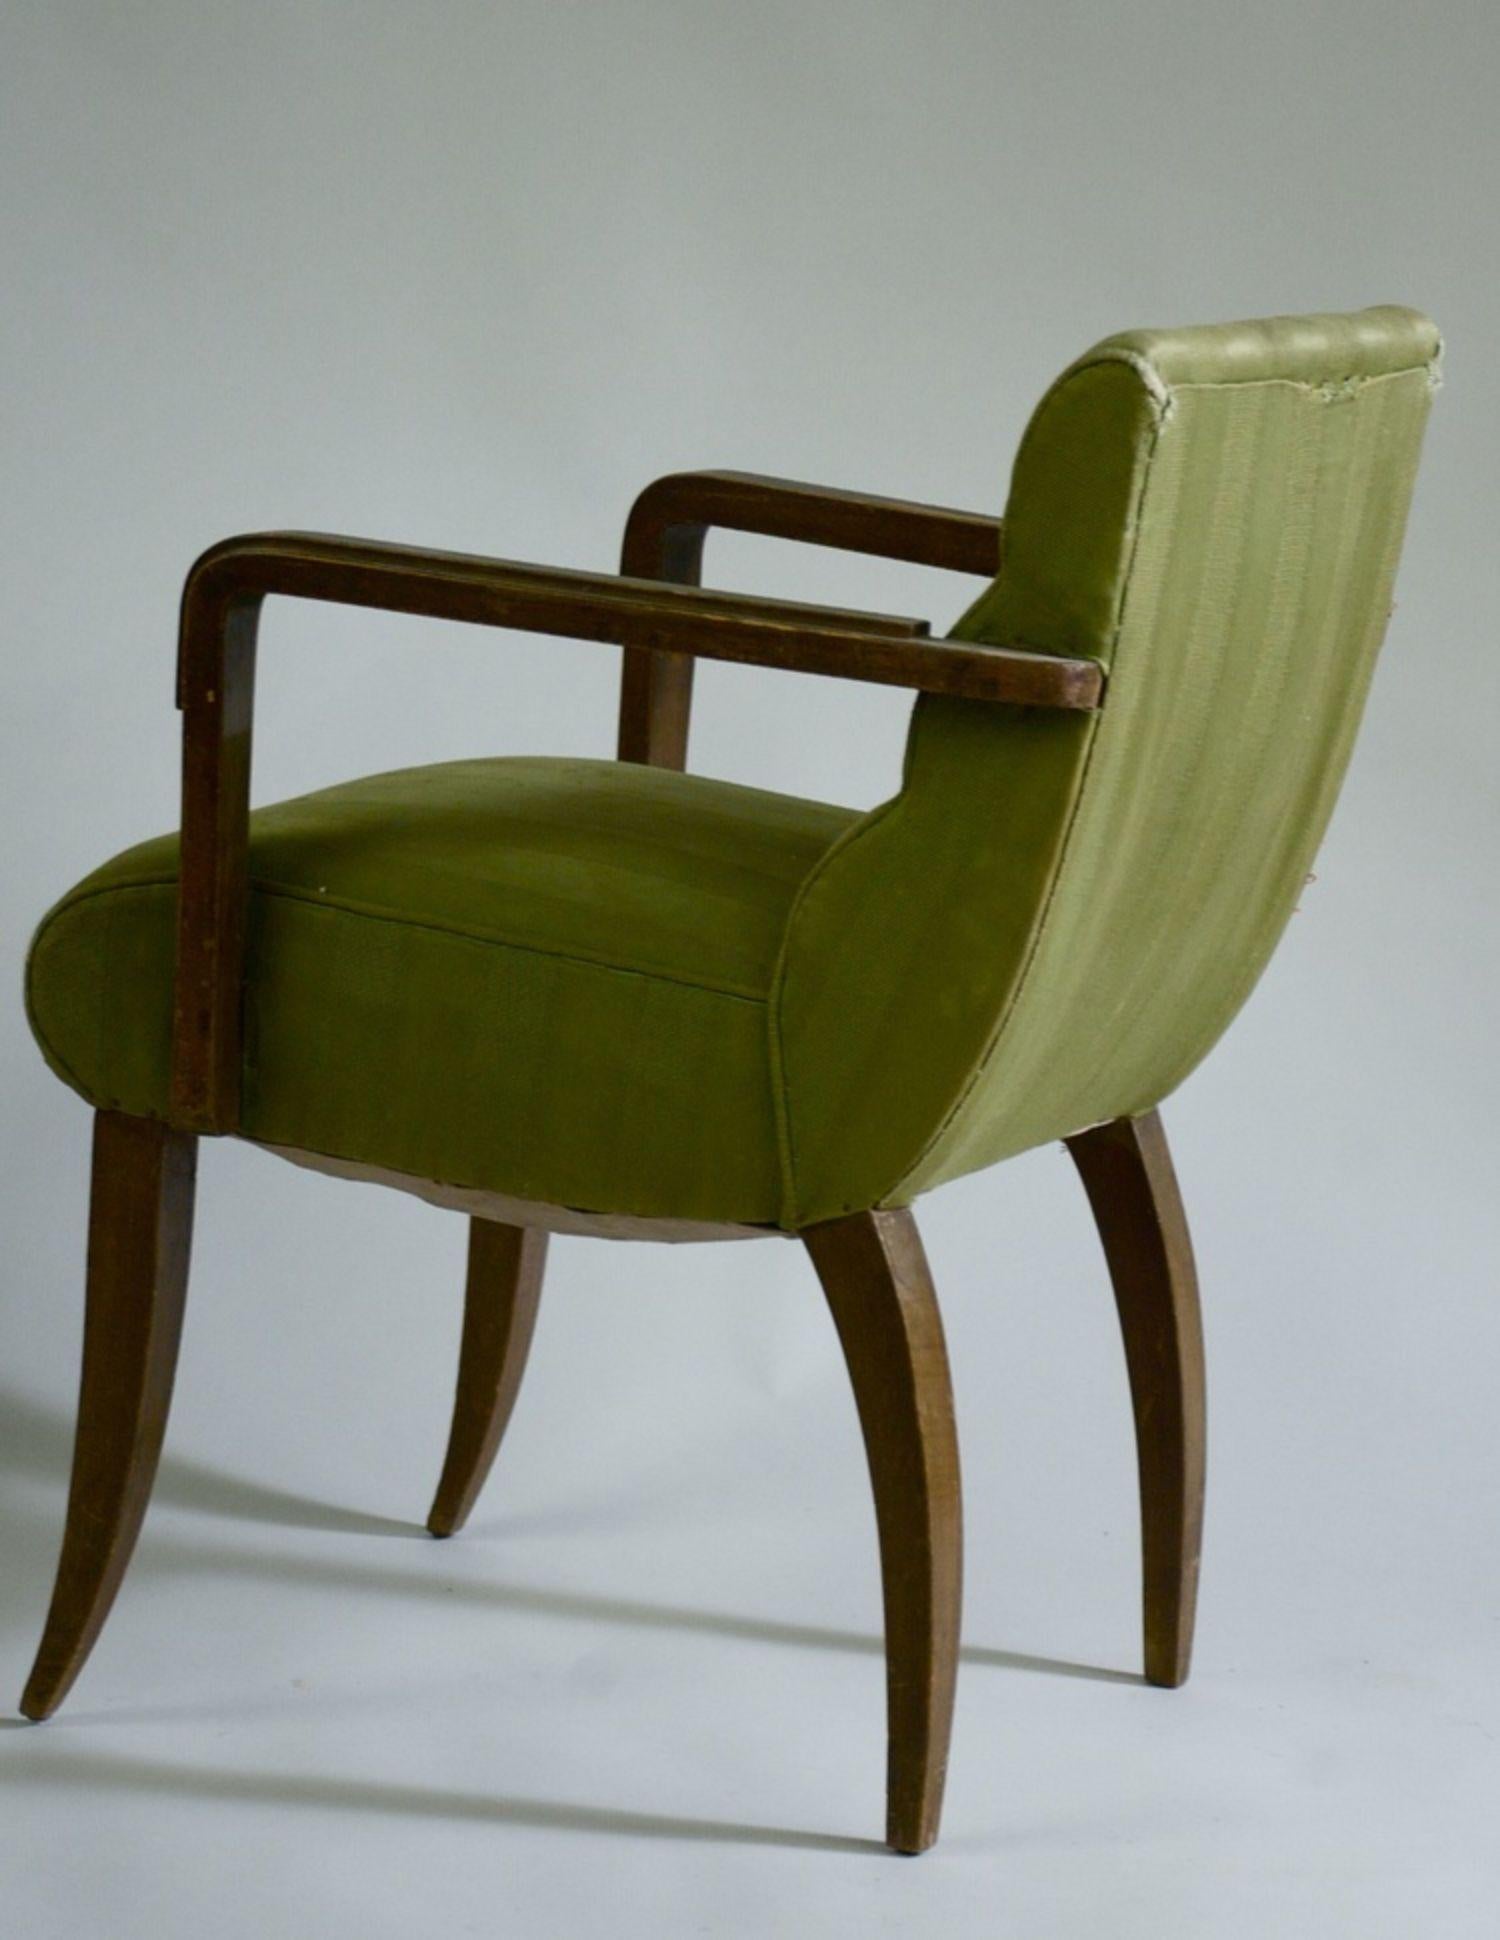 French Art Deco pair of small scale arm/pull up chairs by Rene Prou. 

These chairs are unrestored in the photographs. Pricing include restoration, refinishing, and reupholstering using client supplied fabric.

Measures: 20 wide x 22 deep x 29